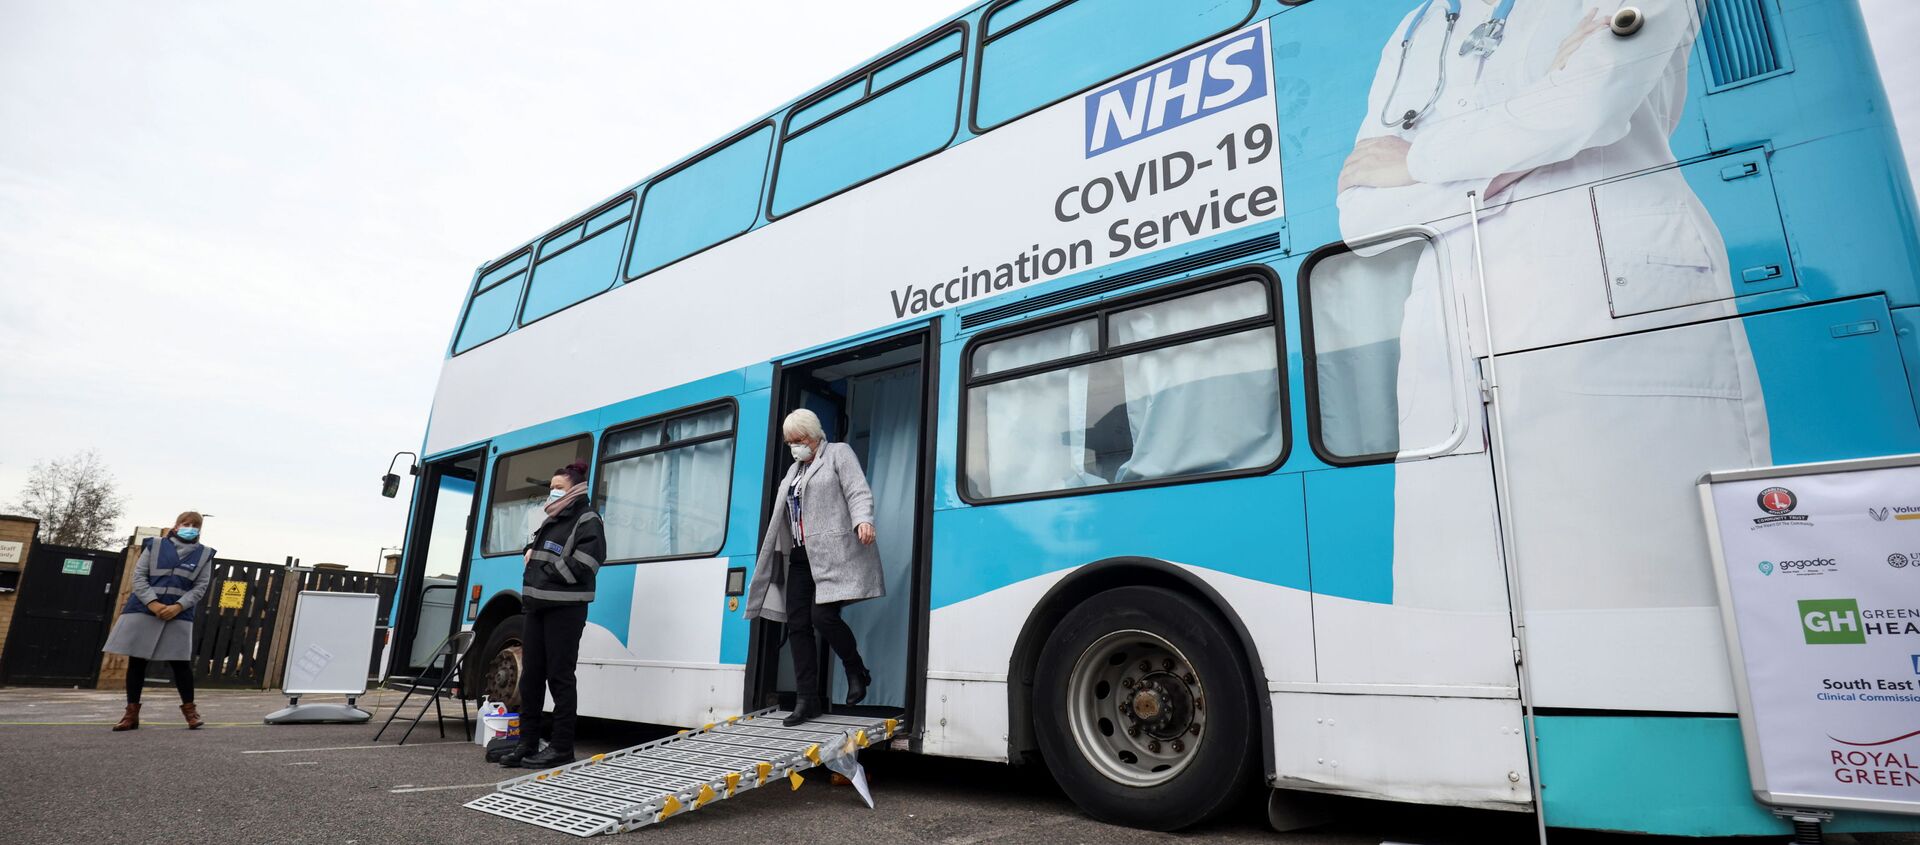 A person gets off a mobile vaccination centre for the coronavirus disease (COVID-19) after receiving the vaccine, in Thamesmead, London, Britain, February 14, 2021. - Sputnik International, 1920